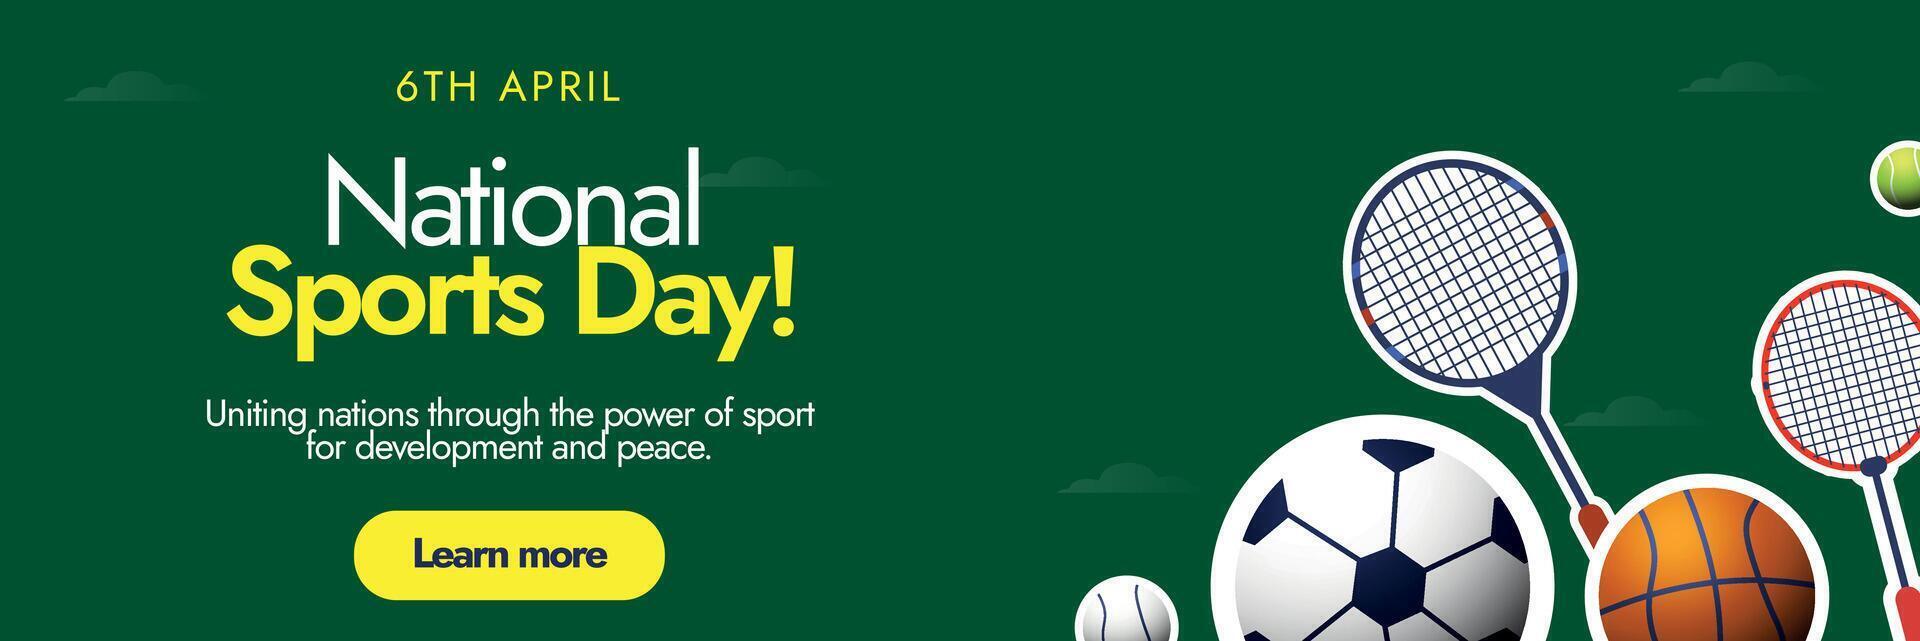 International Sports Day. 6th April National Sports day for development and peace celebration cover banner with different sports equipment and athlete gear tennis ball, racket on dark green background vector